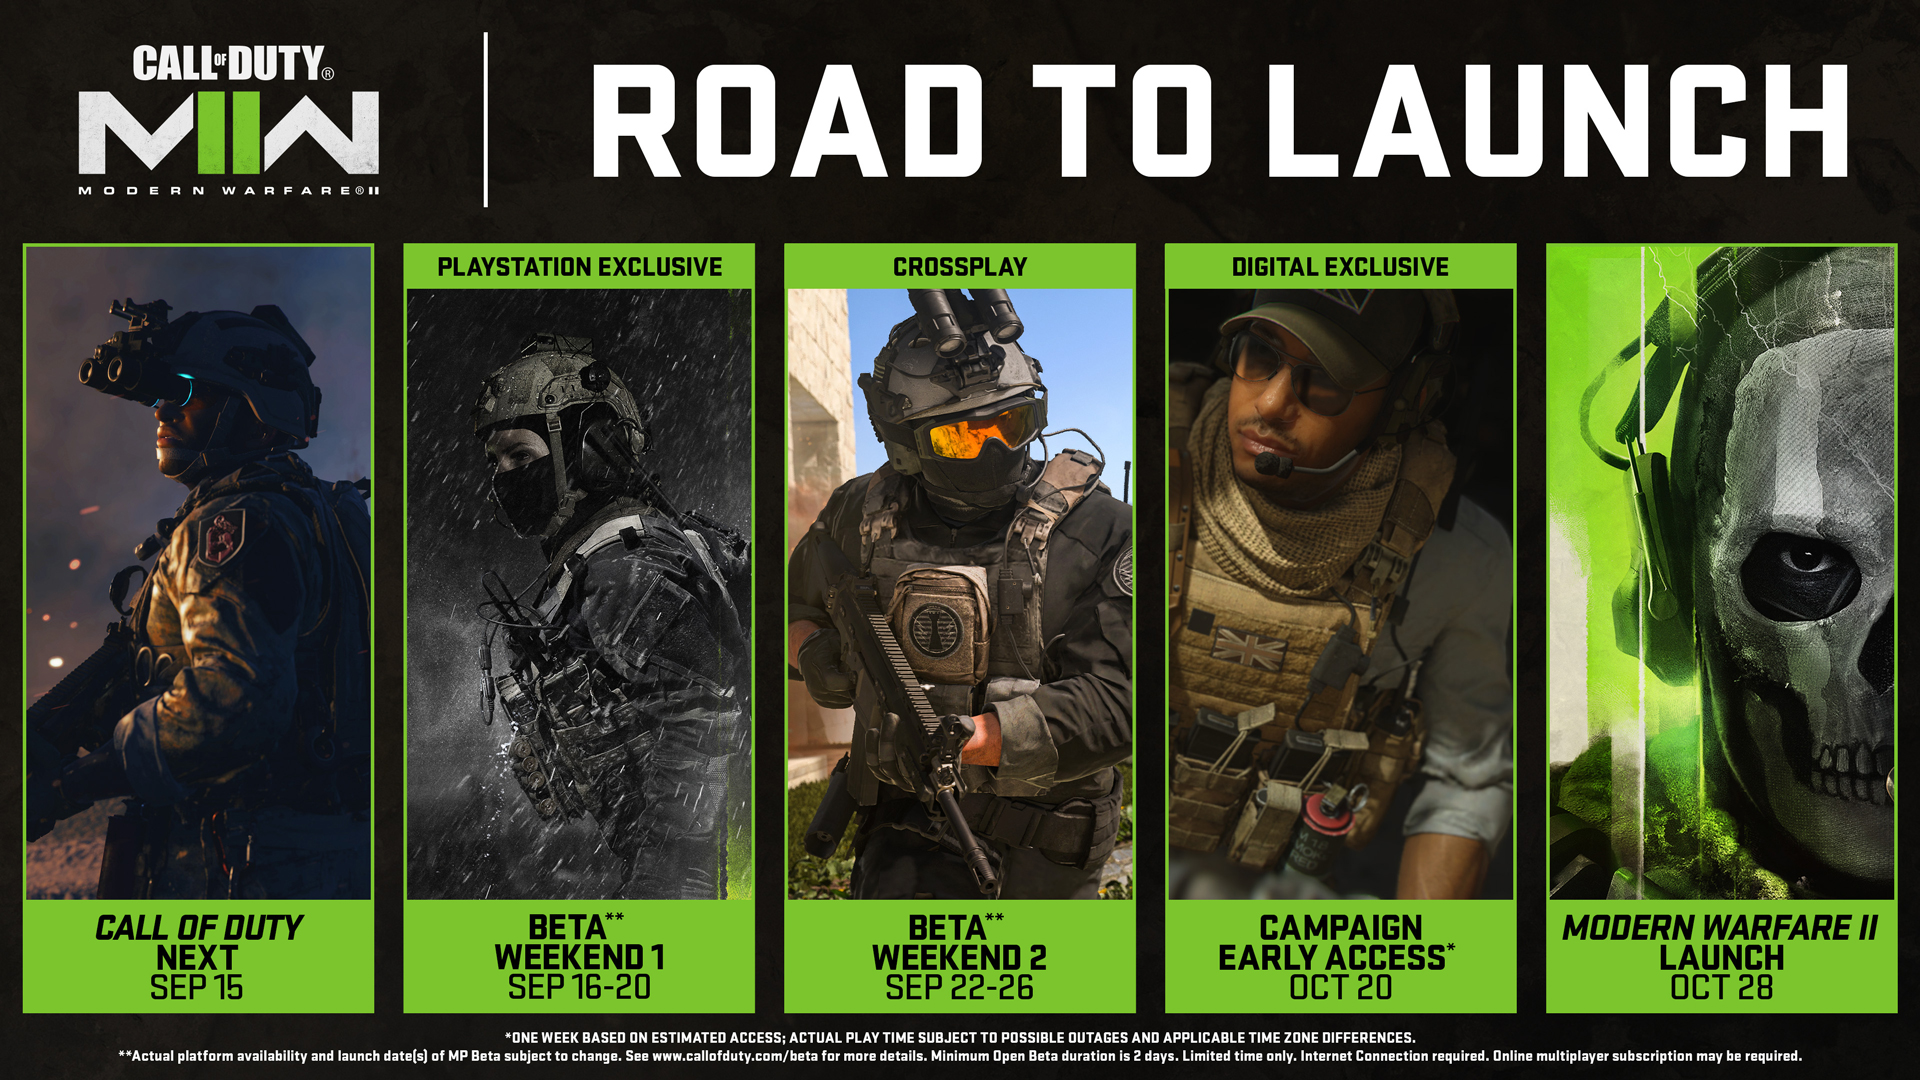 ANNOUNCEMENT: DIGITALLY PREORDER CALL OF DUTY®: MODERN WARFARE® II TO PLAY THE FULL CAMPAIGN UP TO A WEEK BEFORE LAUNCH¹, STARTING OCTOBER 20, 2022